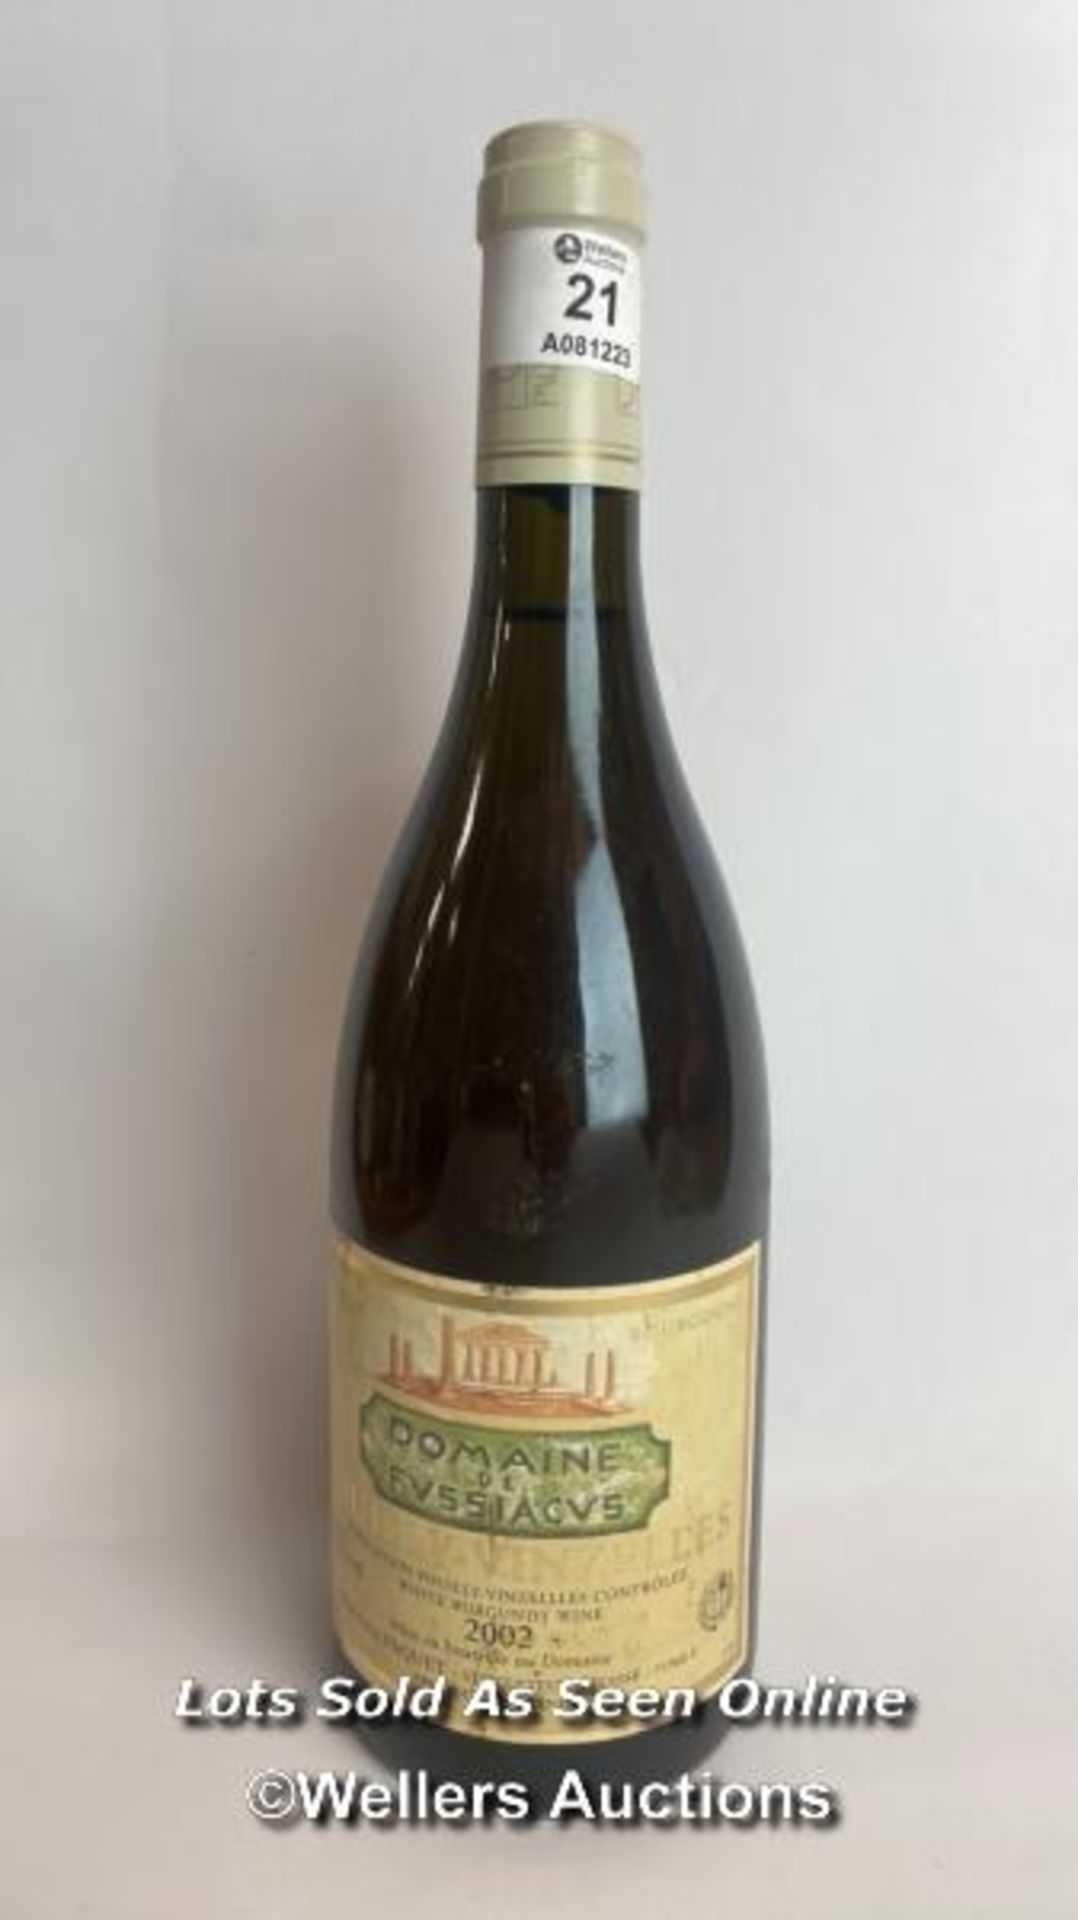 2002 Pouilly-Vinzelles White Burgandy Wine, 75cl, 13% vol / Please see images for fill level and